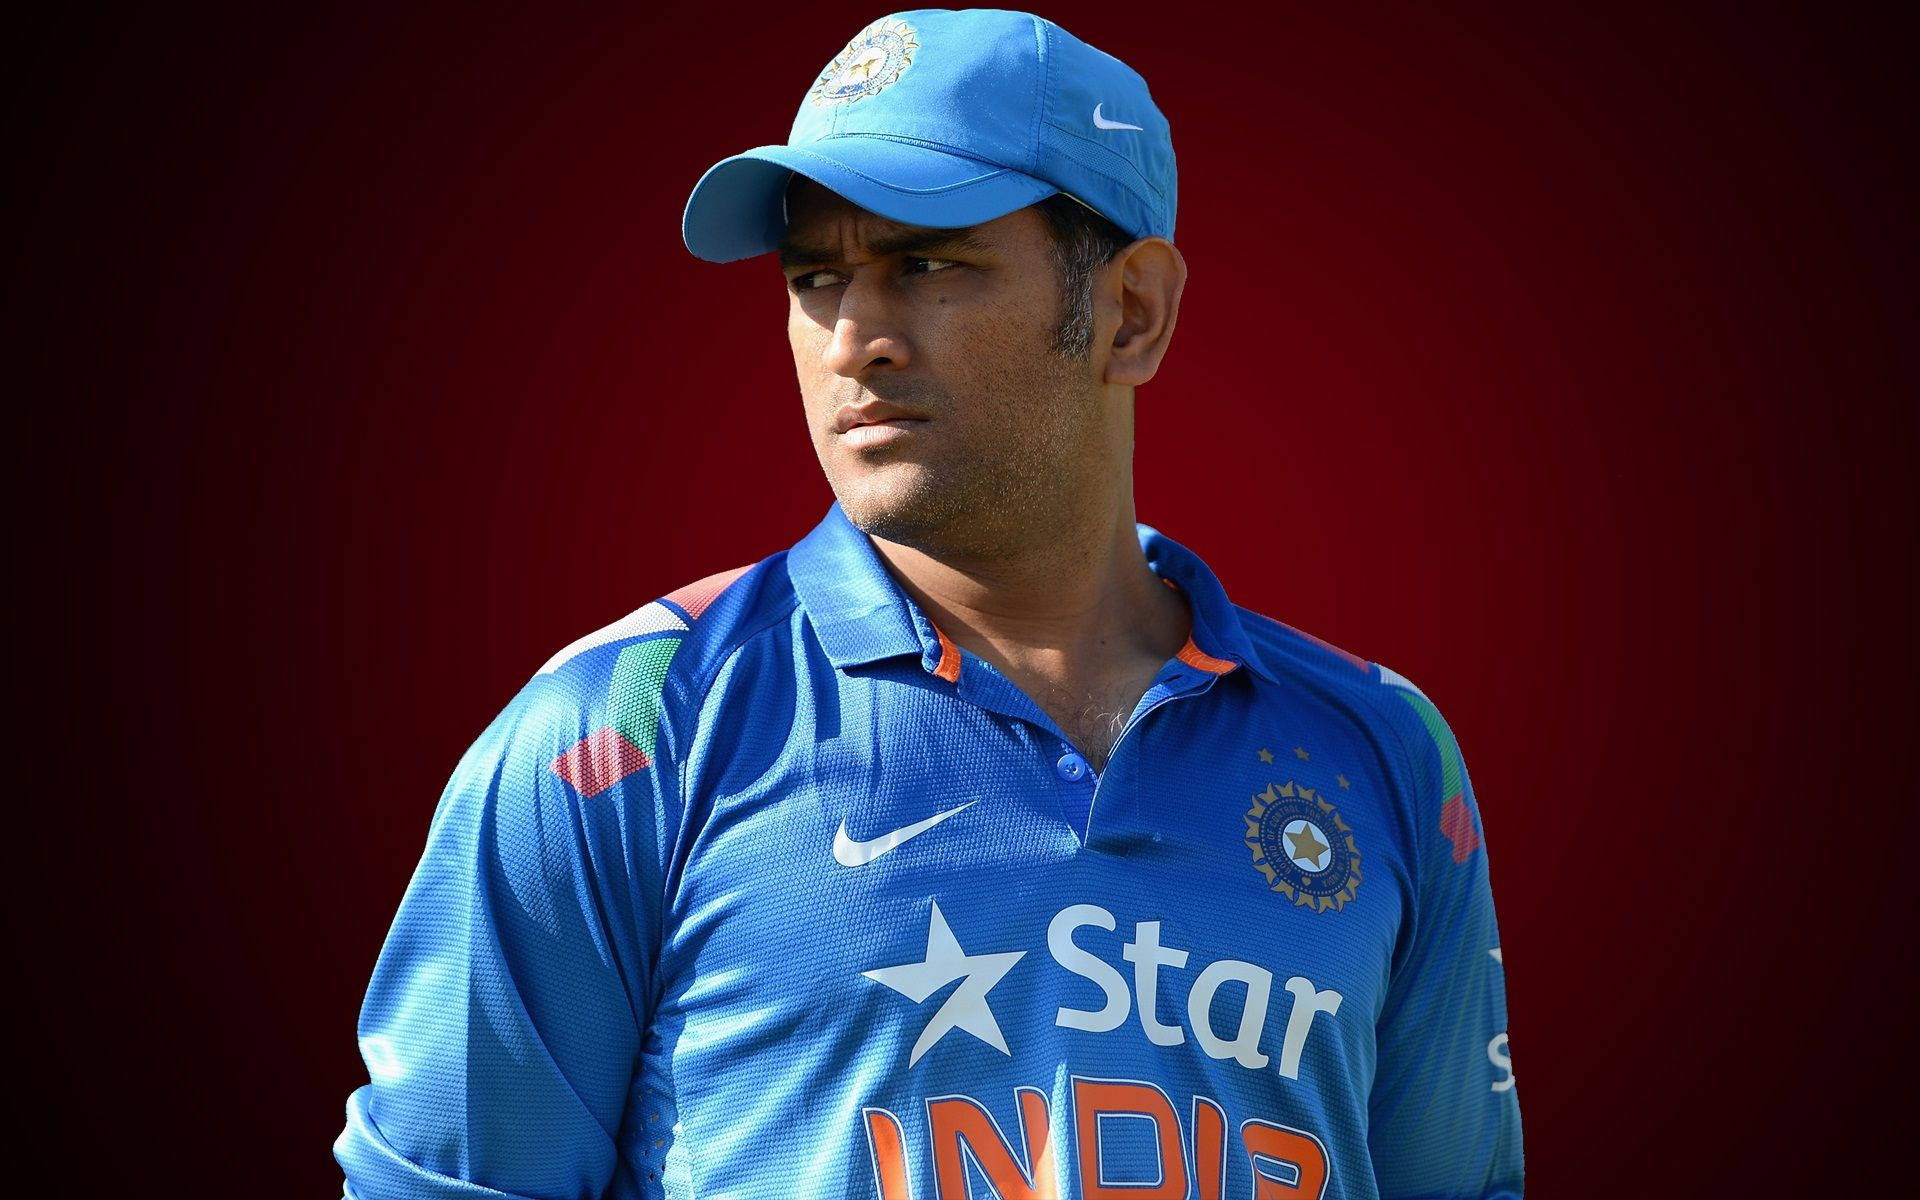 MS Dhoni Wallpaper HD Mobile: Get the best Wallpaper of your favourite MSD  - India Fantasy